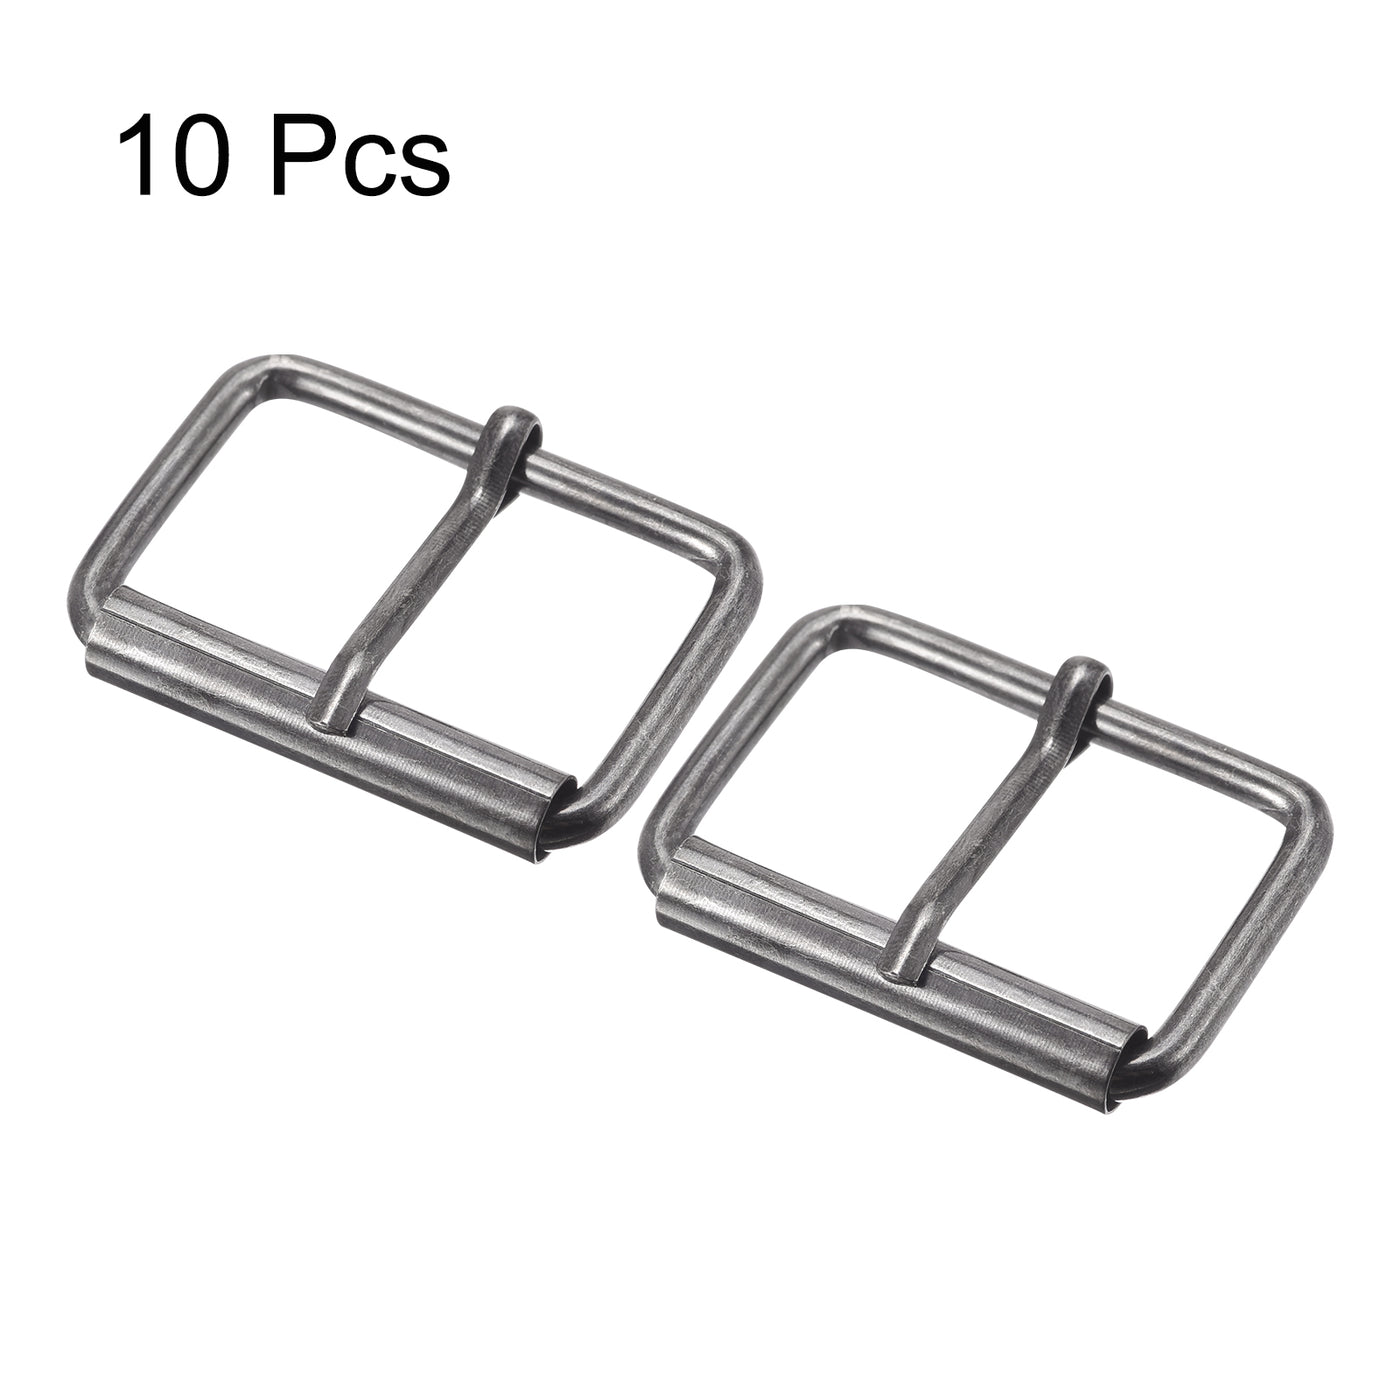 uxcell Uxcell 40mm(1.57") Metal Roller Buckles for Belts Bags Straps DIY Dark Gray 10pcs